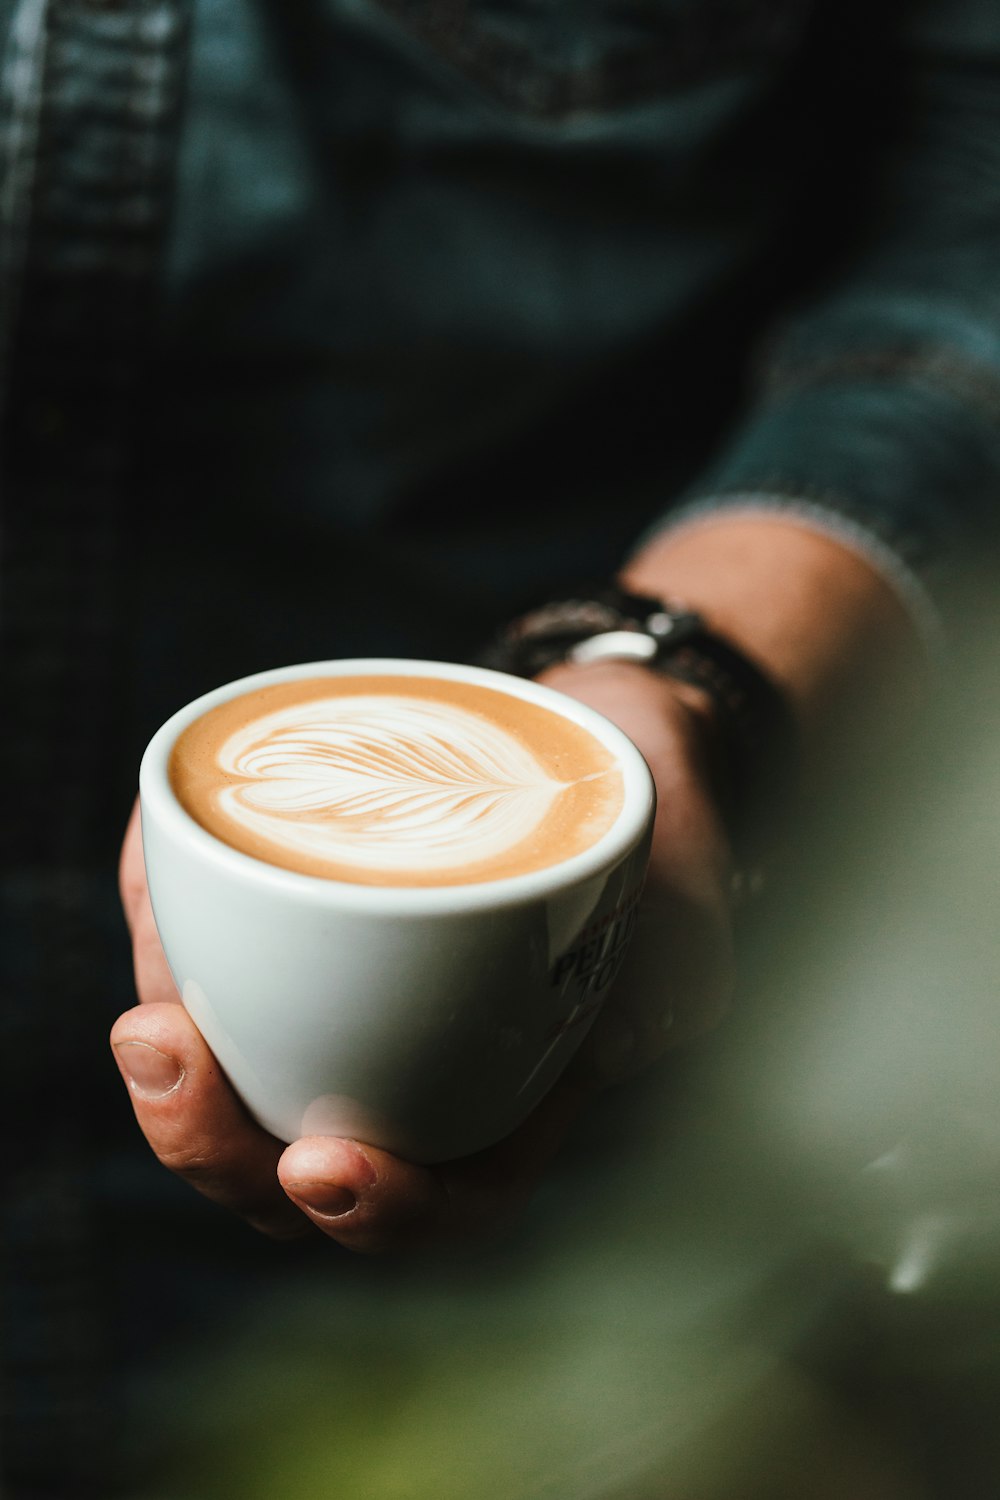 Capuchino Pictures  Download Free Images on Unsplash